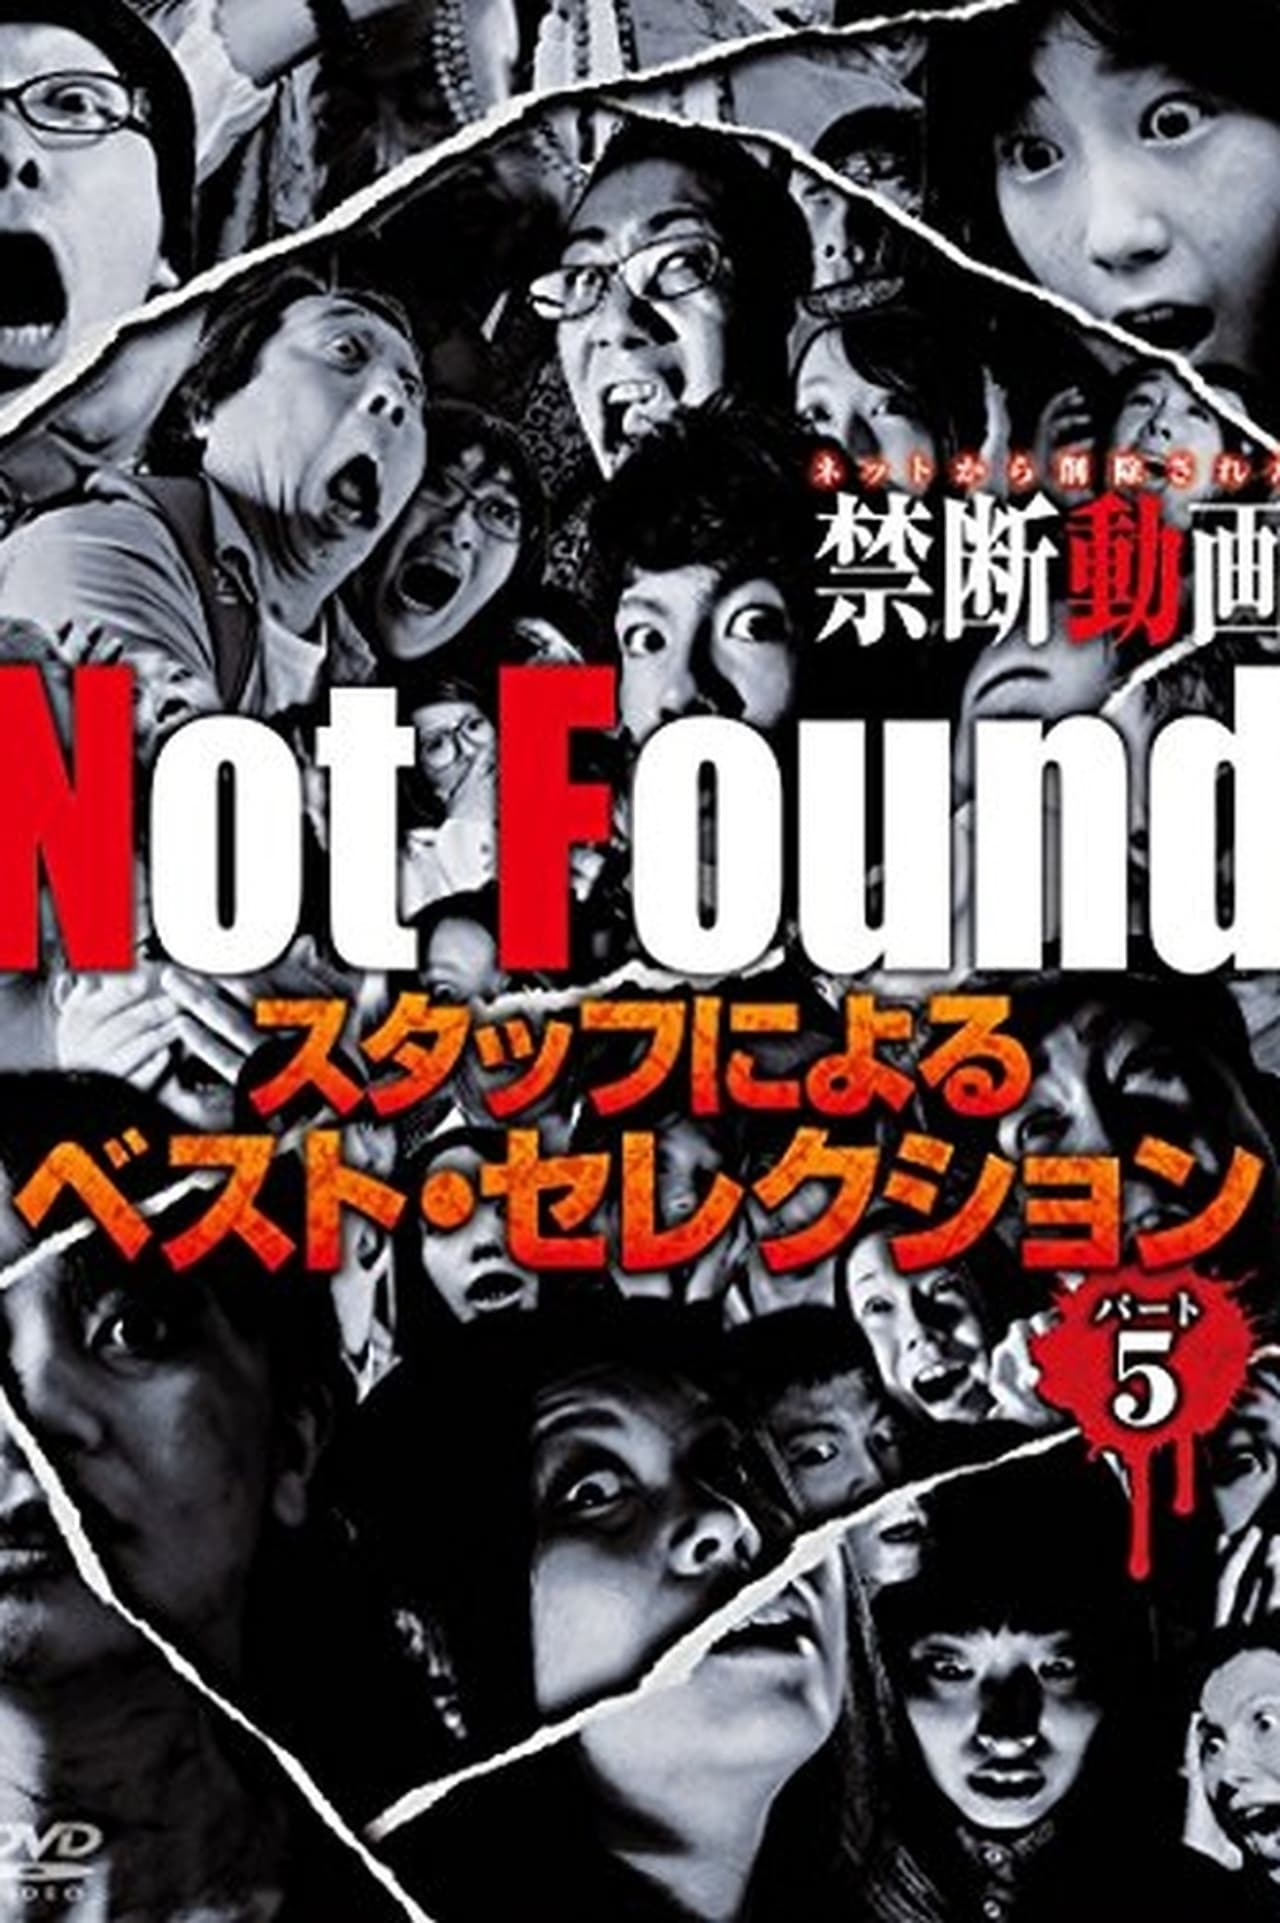 Not Found - Forbidden Videos Removed from the Net - Best Selection by Staff Part 5